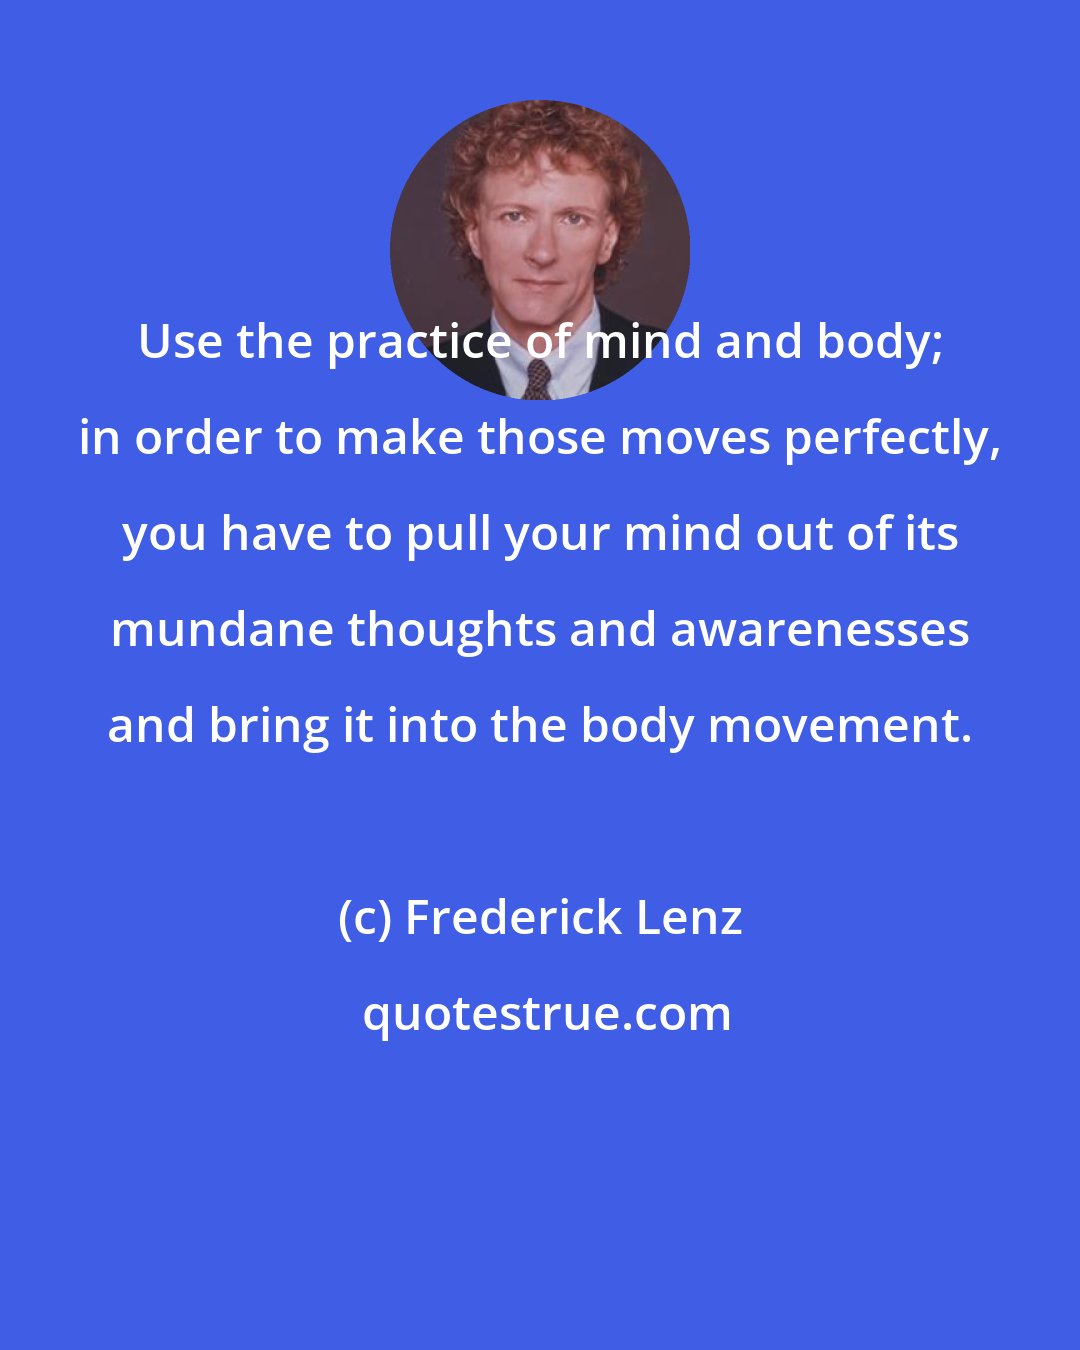 Frederick Lenz: Use the practice of mind and body; in order to make those moves perfectly, you have to pull your mind out of its mundane thoughts and awarenesses and bring it into the body movement.